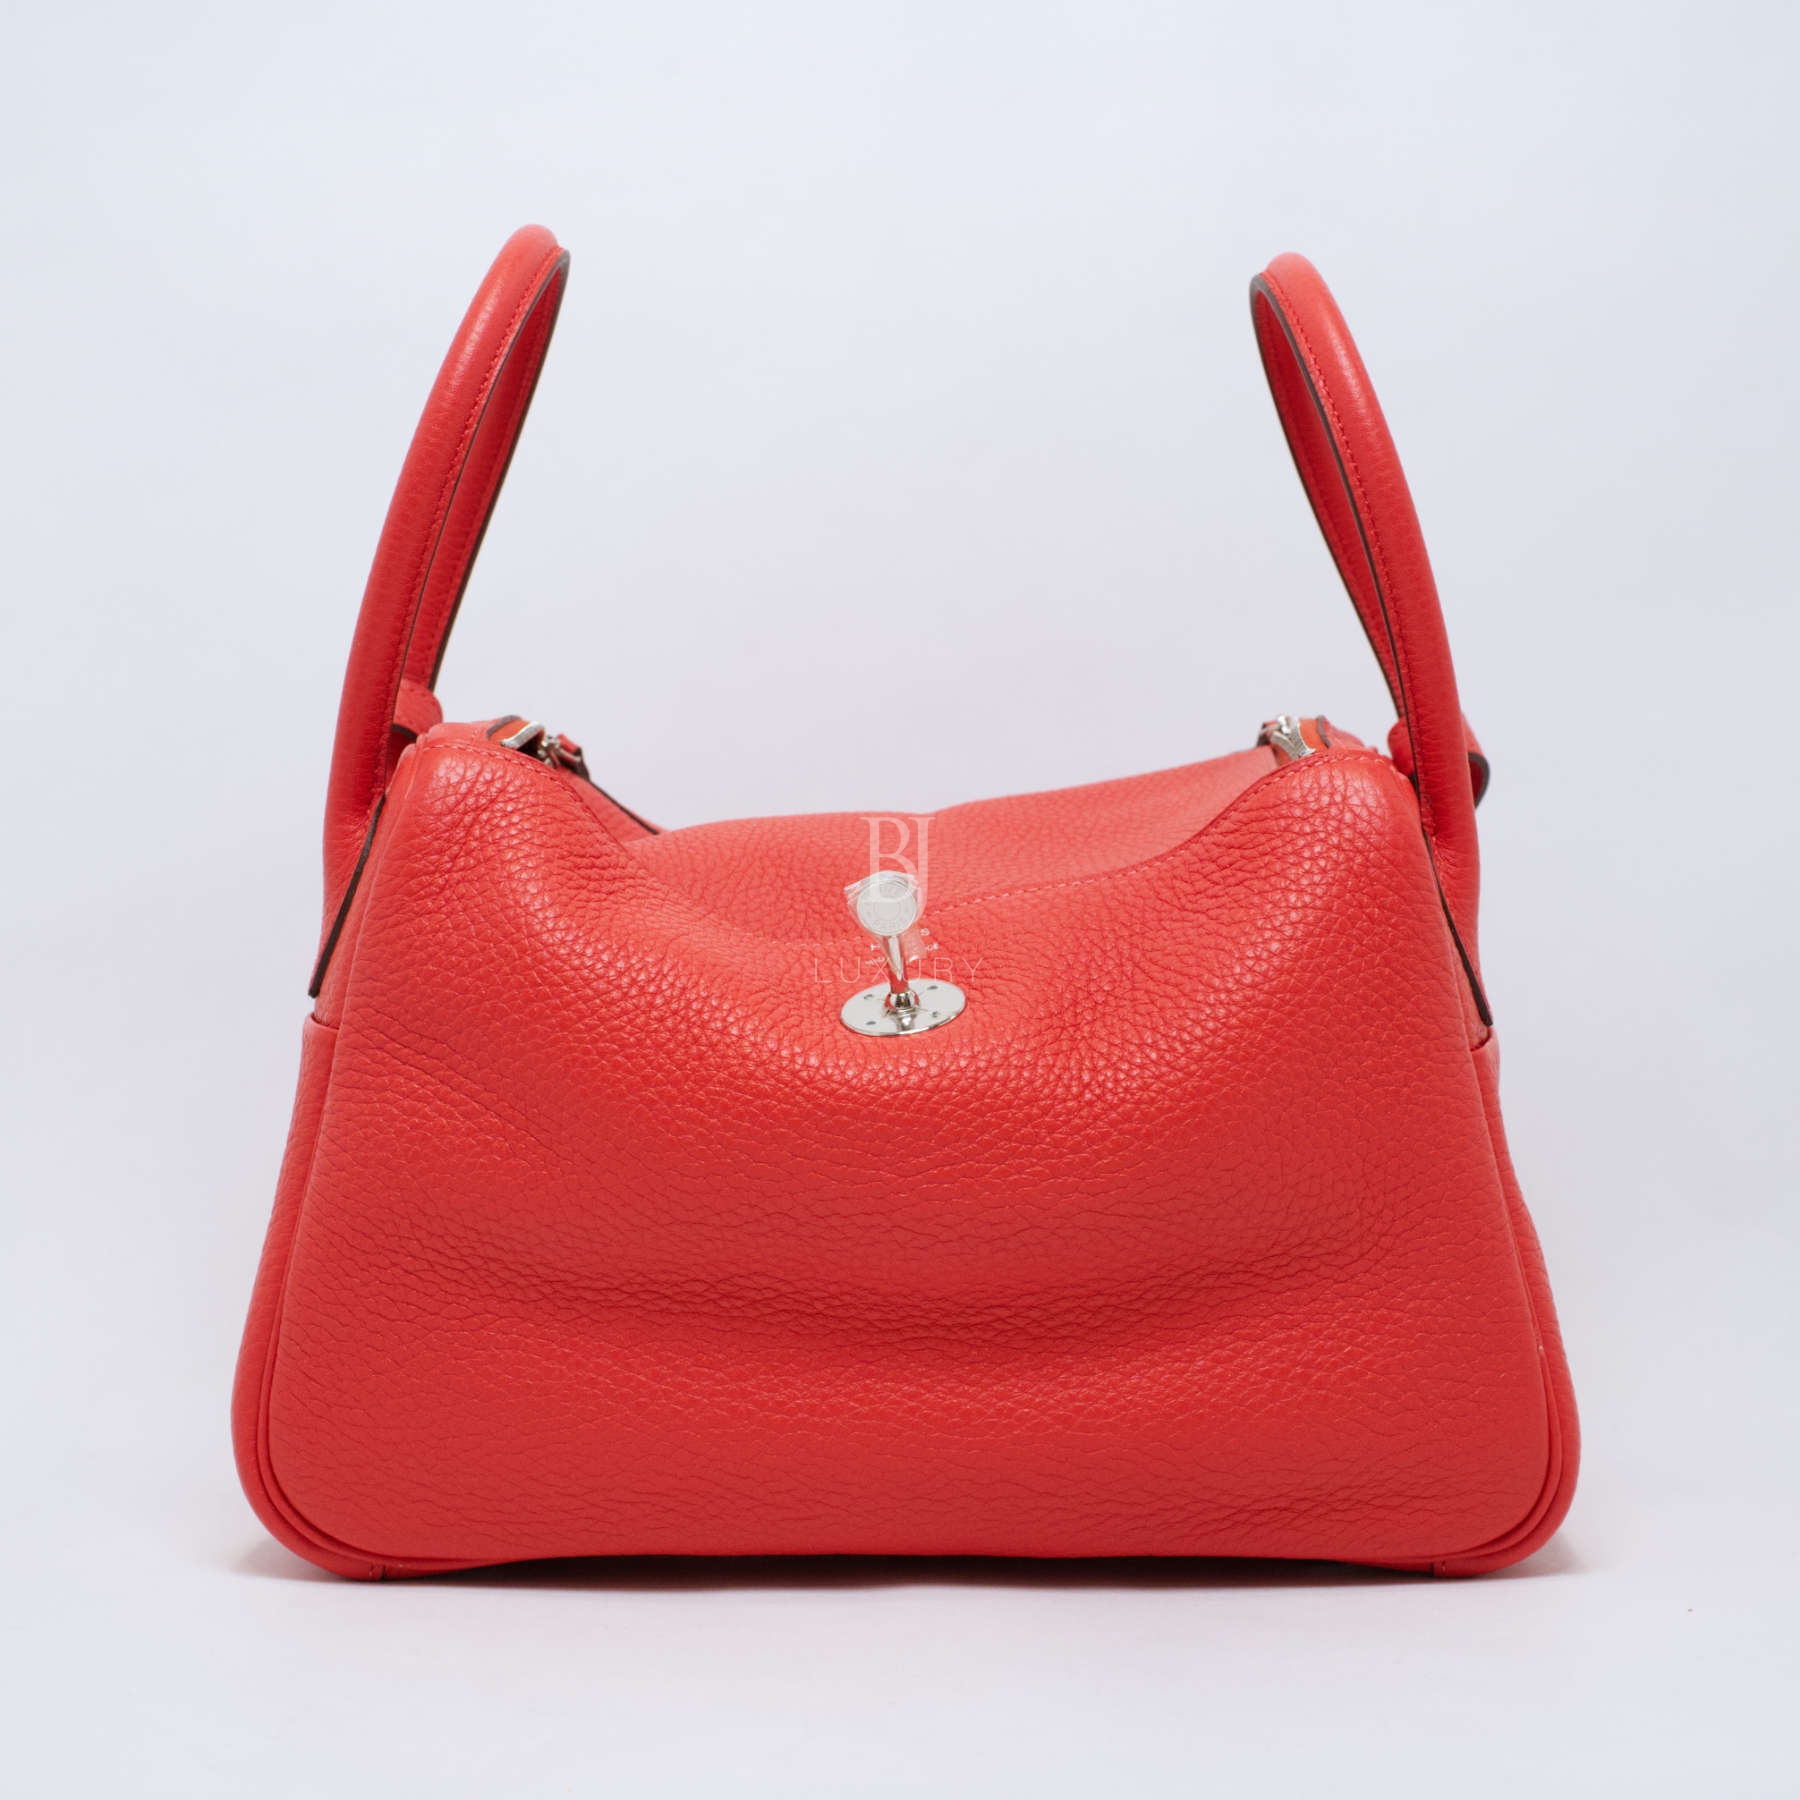 HERMES-LINDY-26-ROUGETOMATE-CLEMENCE-4812 open front1.jpg